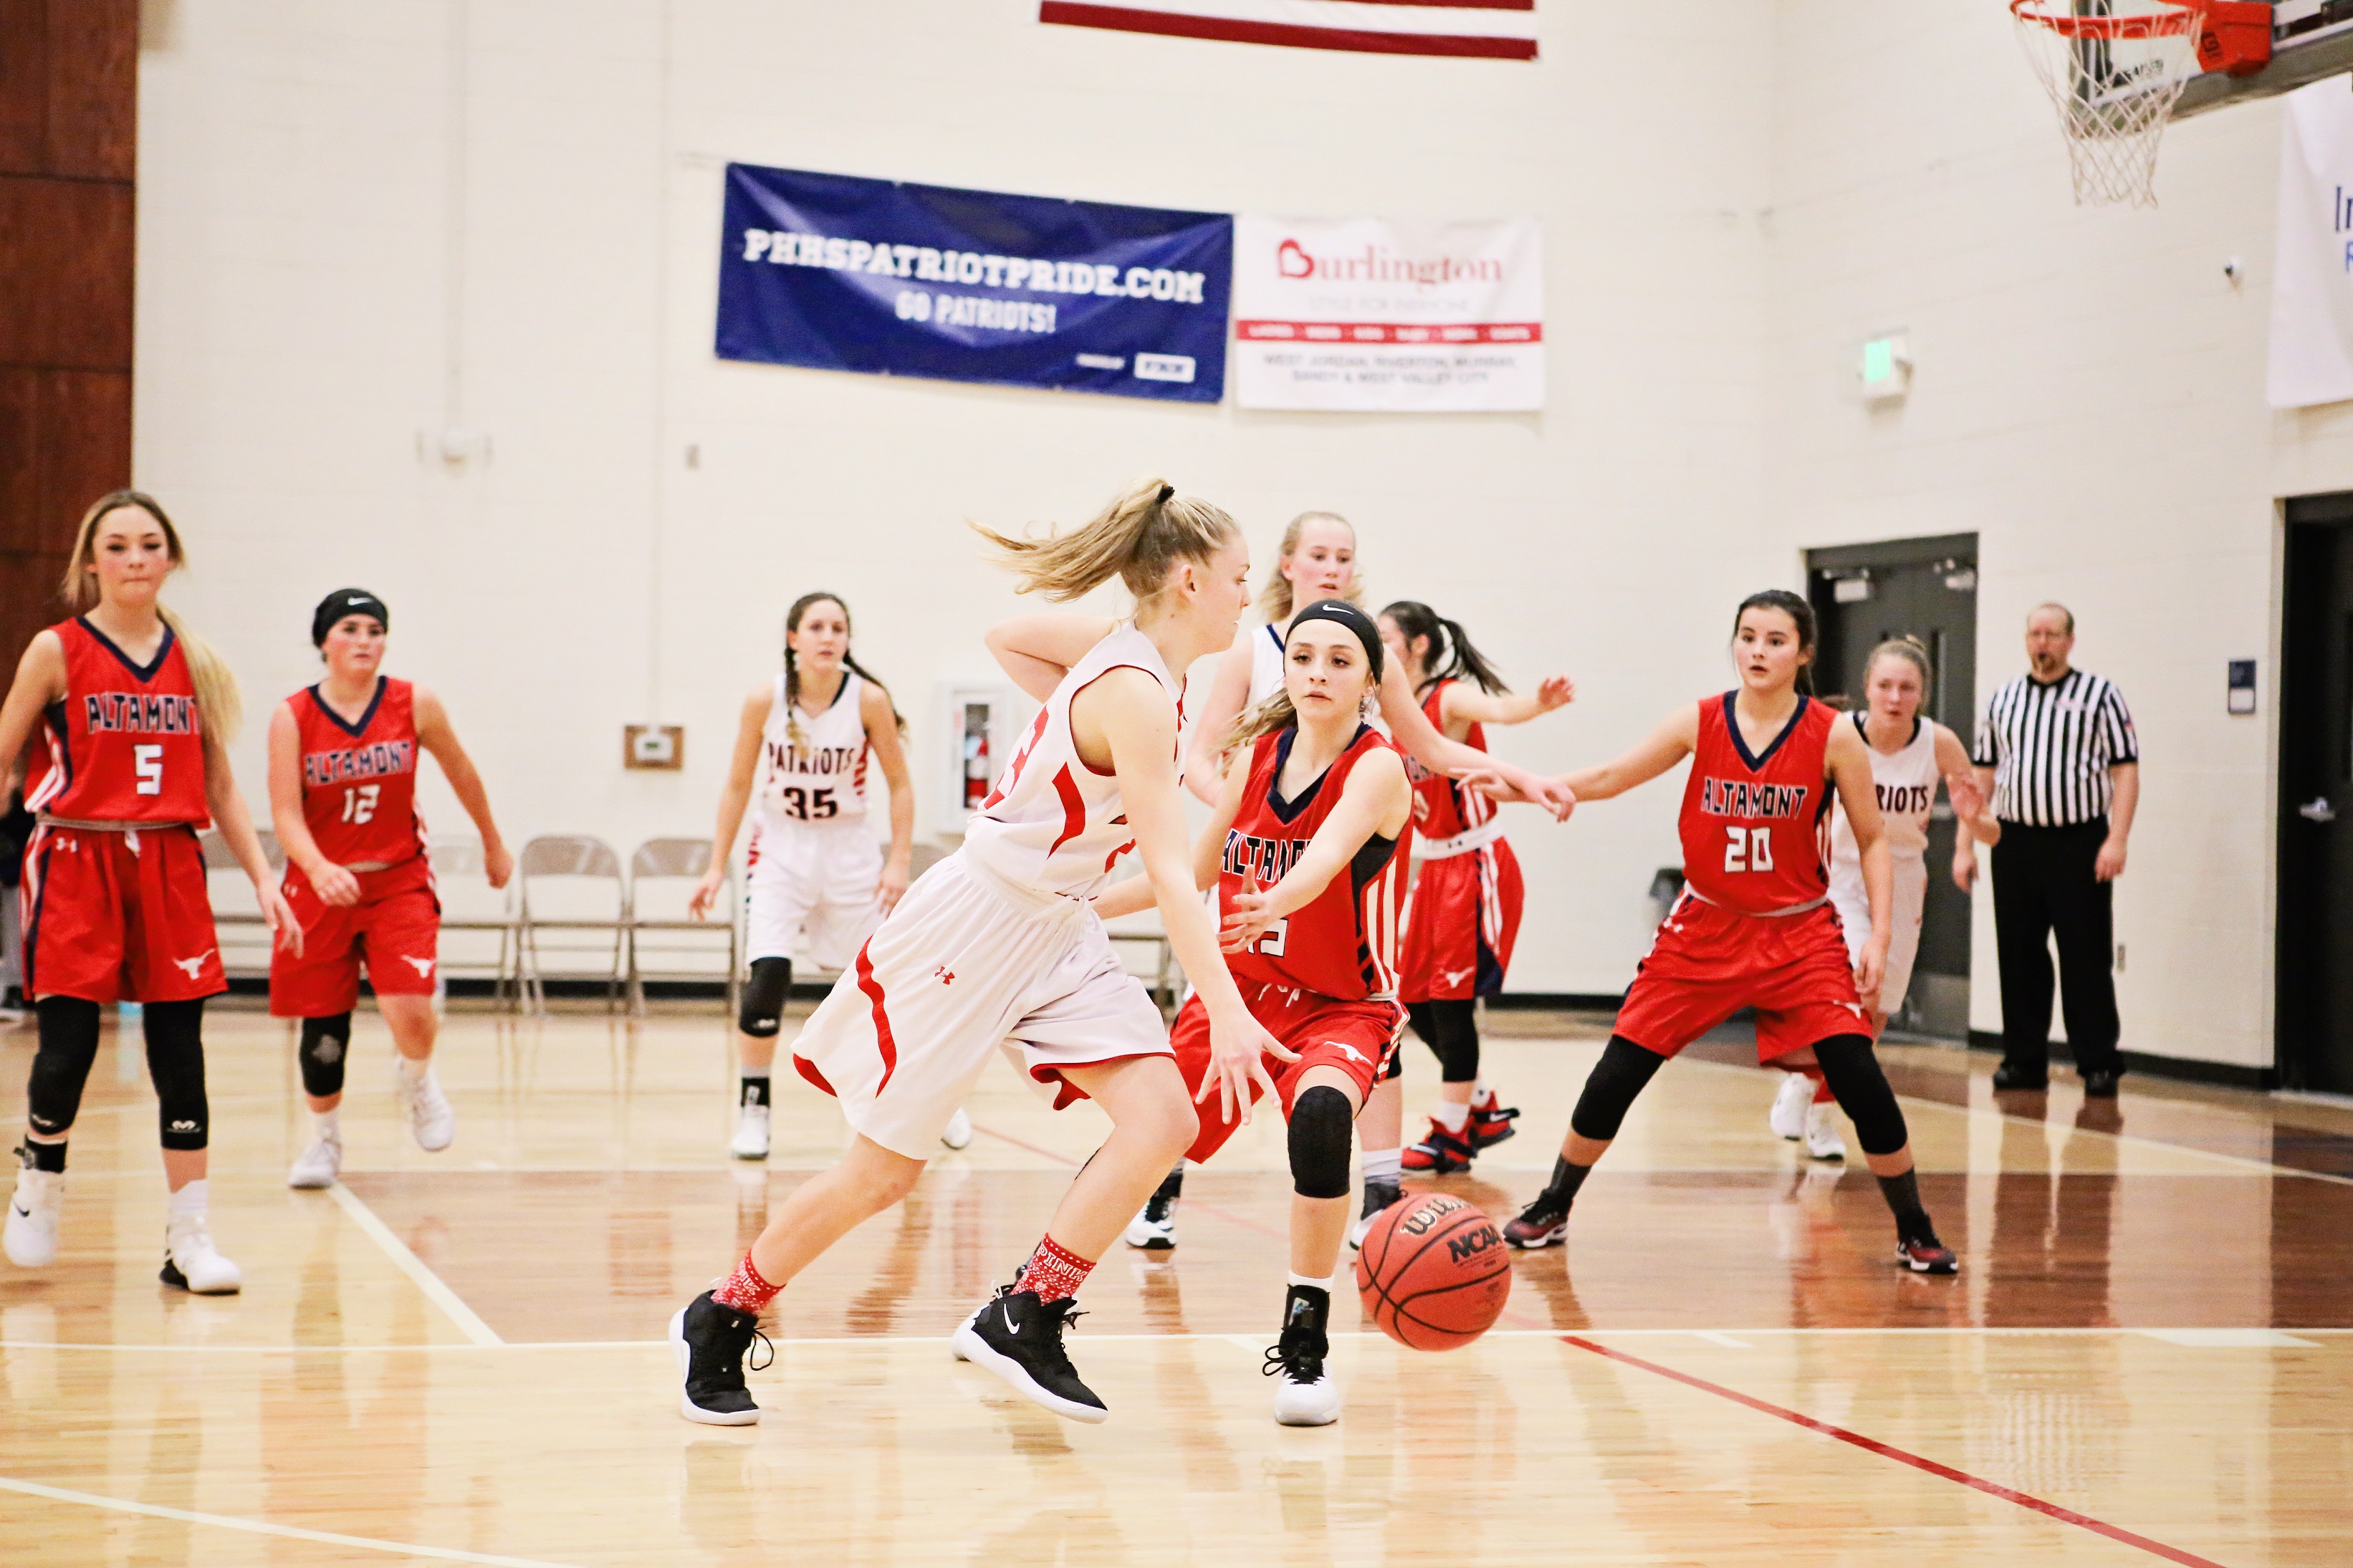 girls basketball team playing in a game